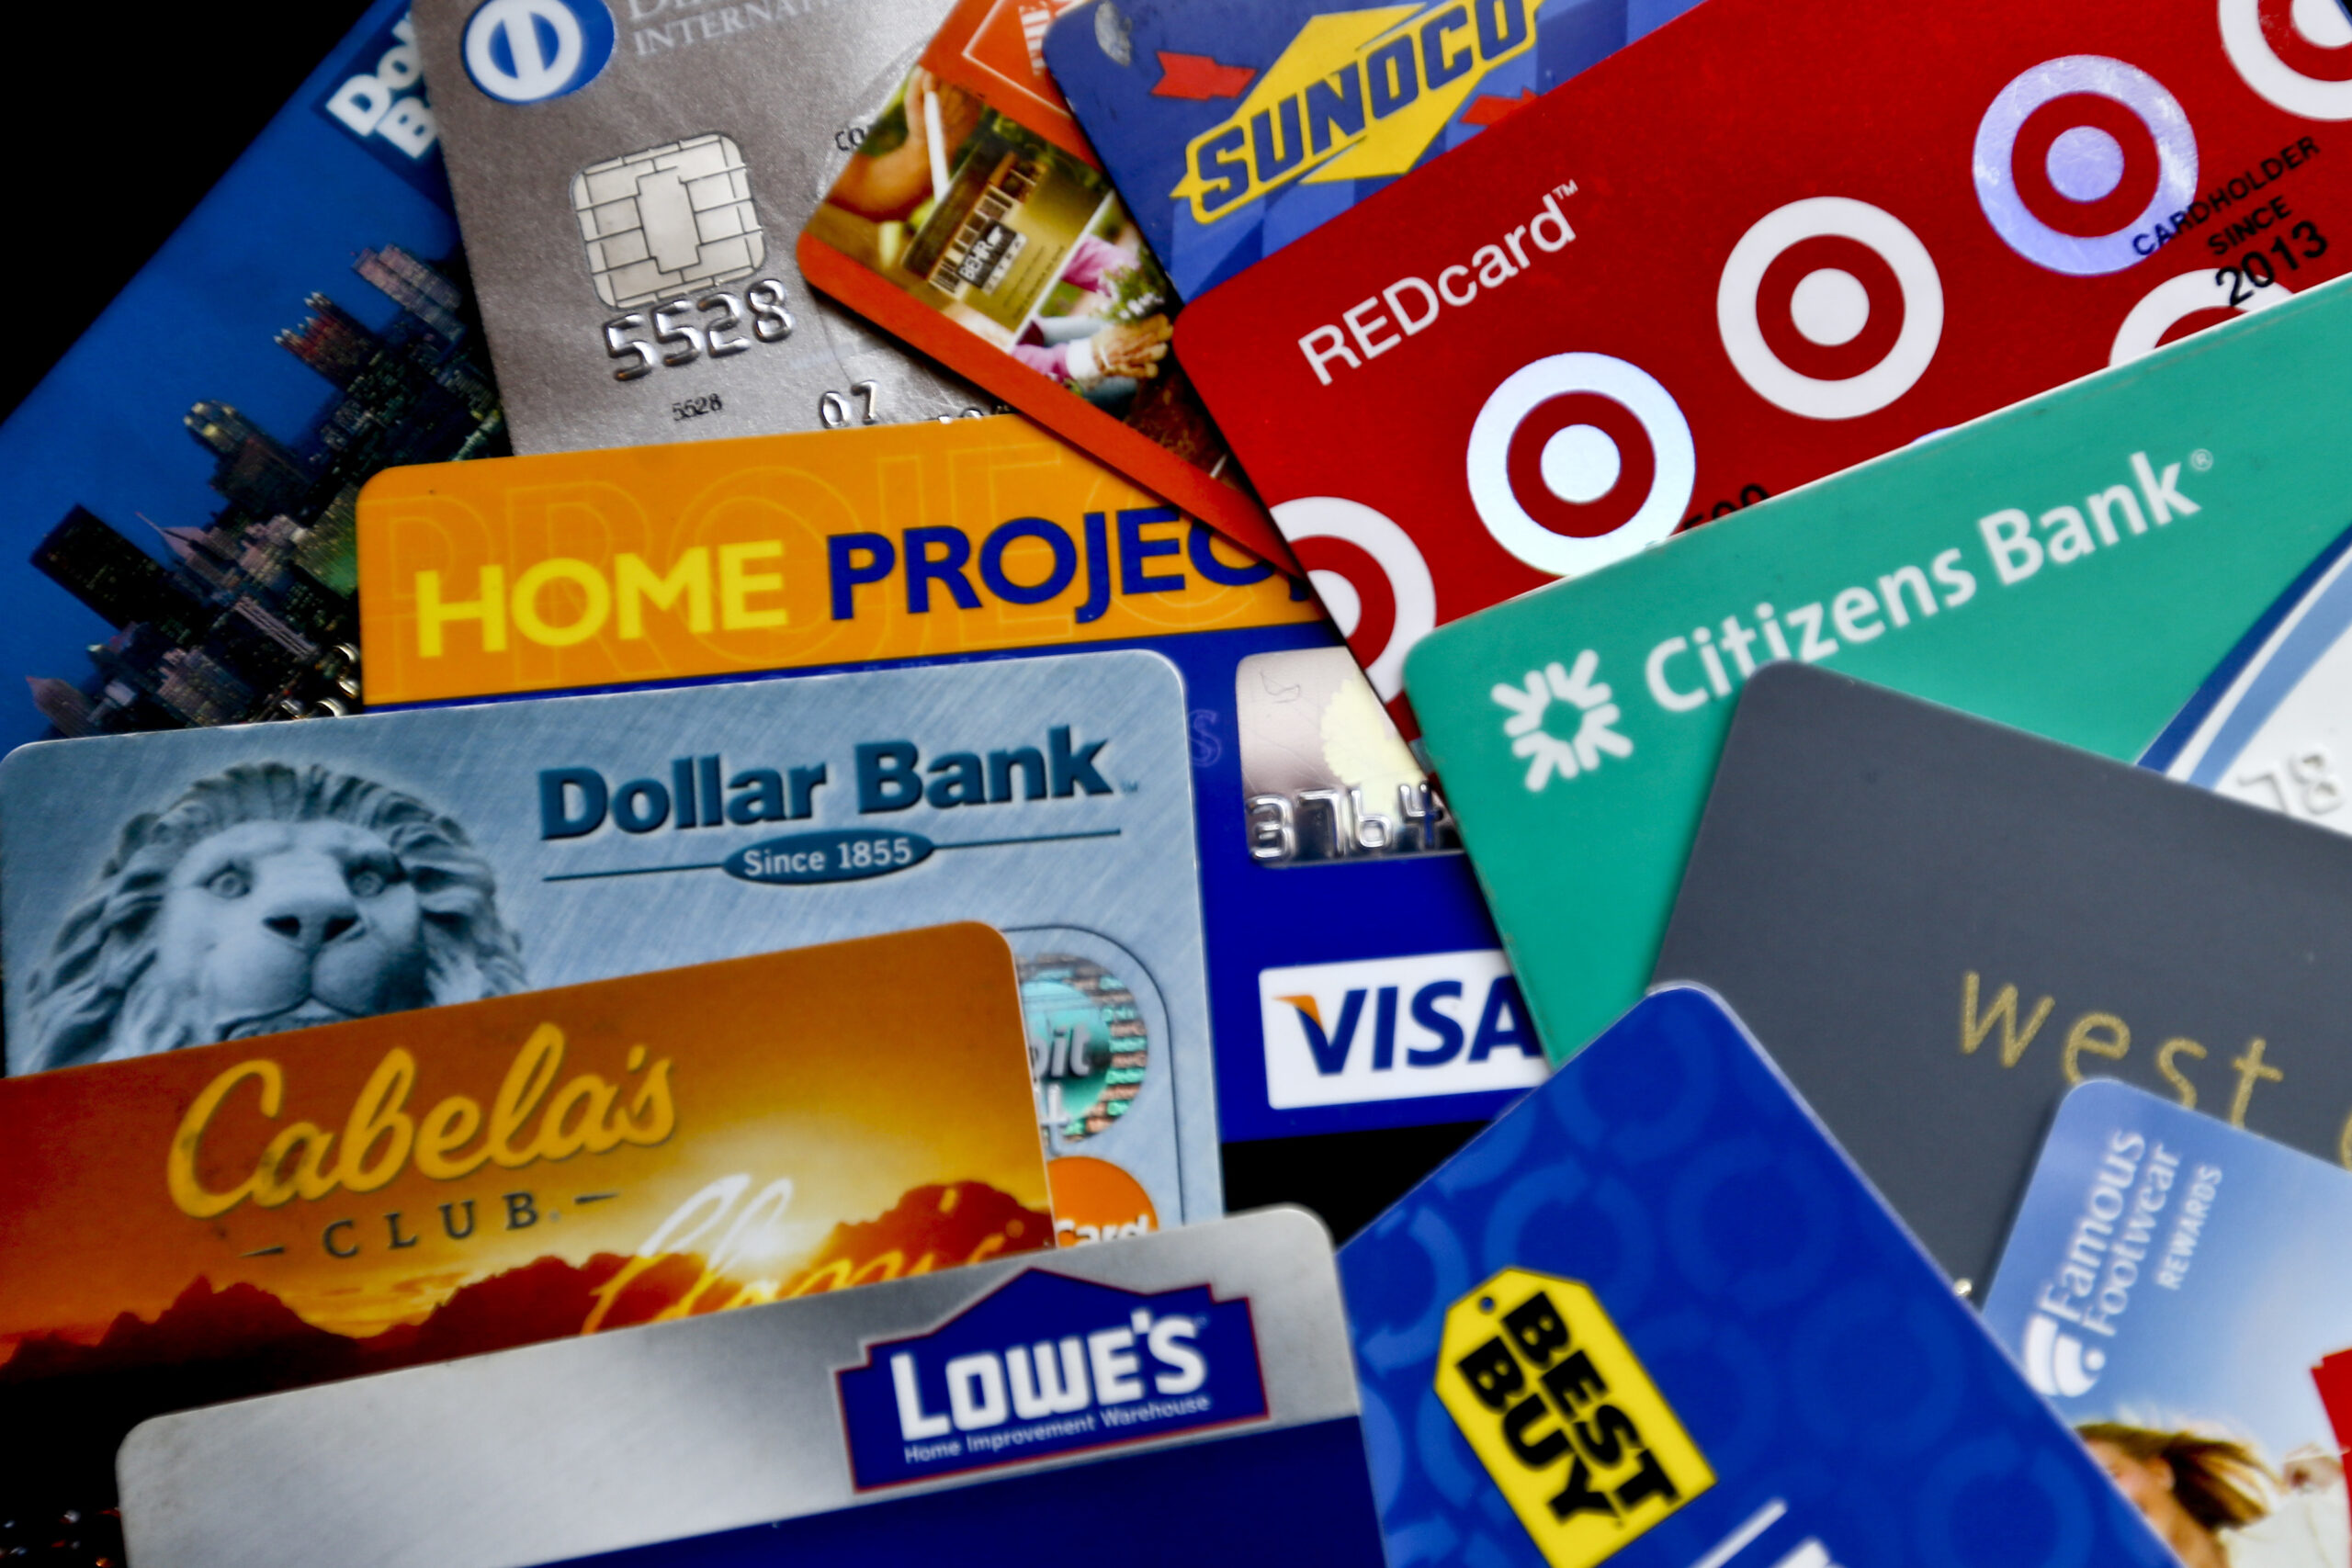 An assortment of credit cards and rewards cards.